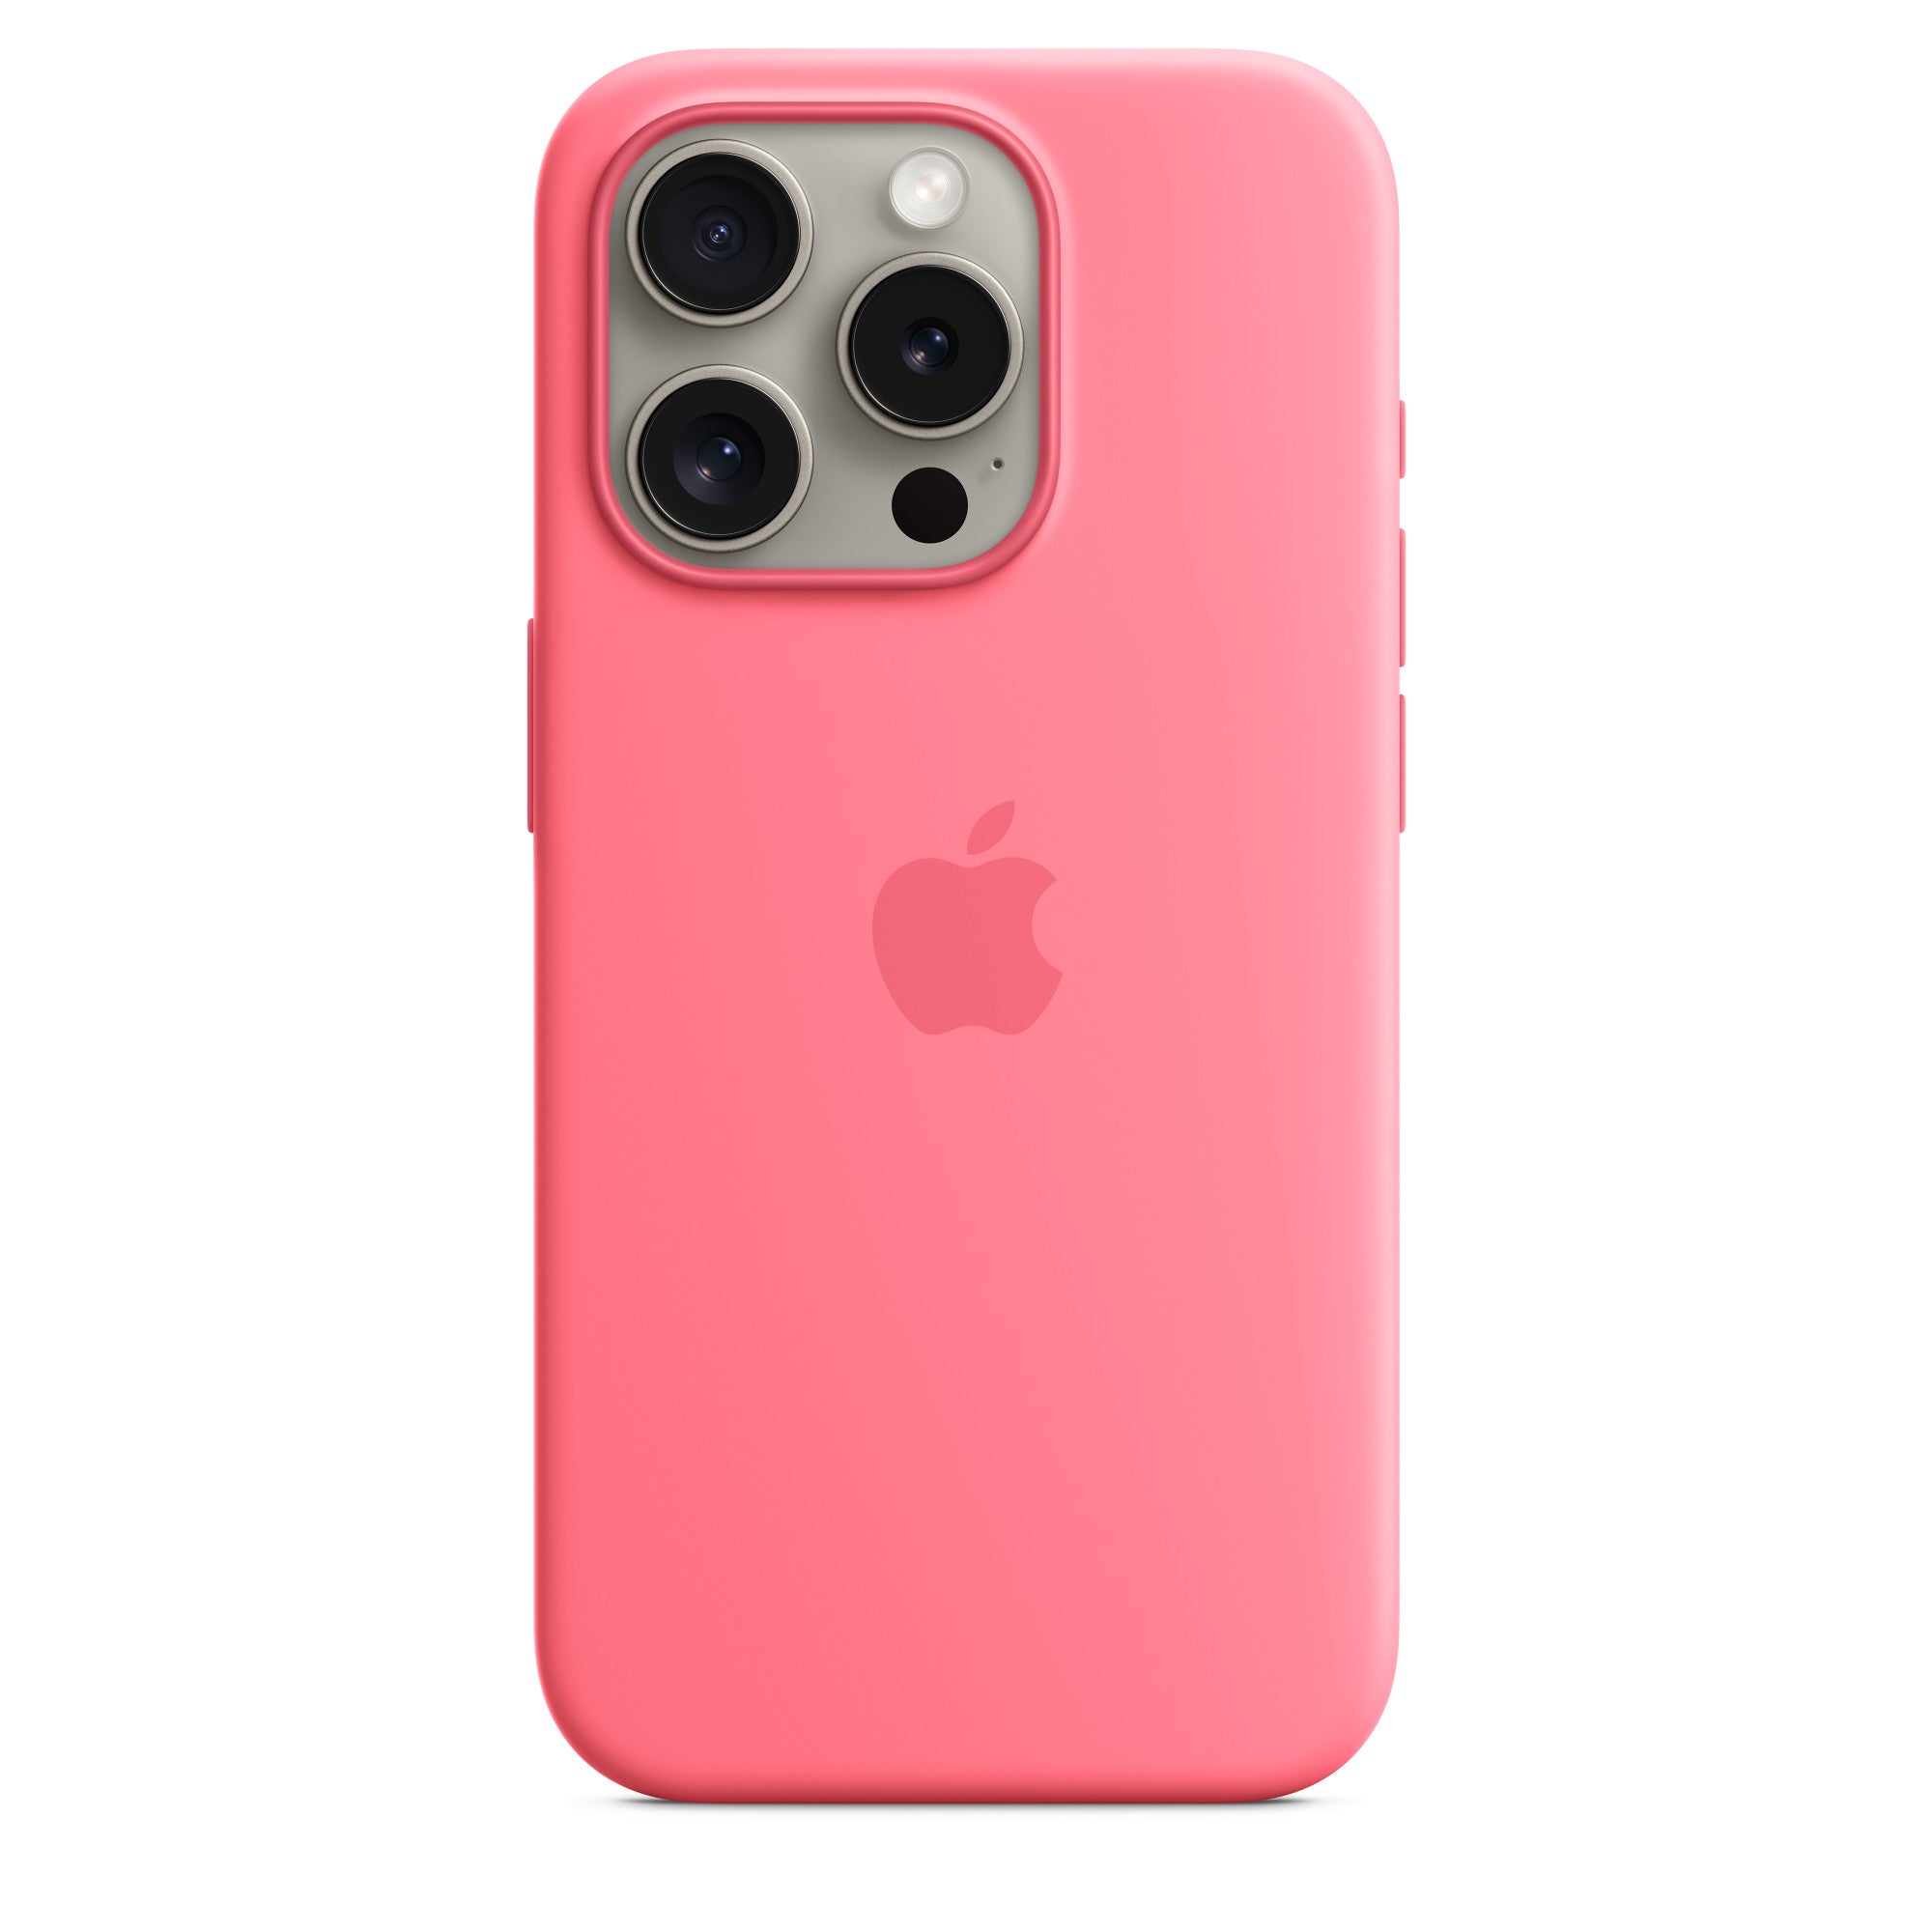 iPhone 15 Pro Max Silicone Case with Wireless Charging Support